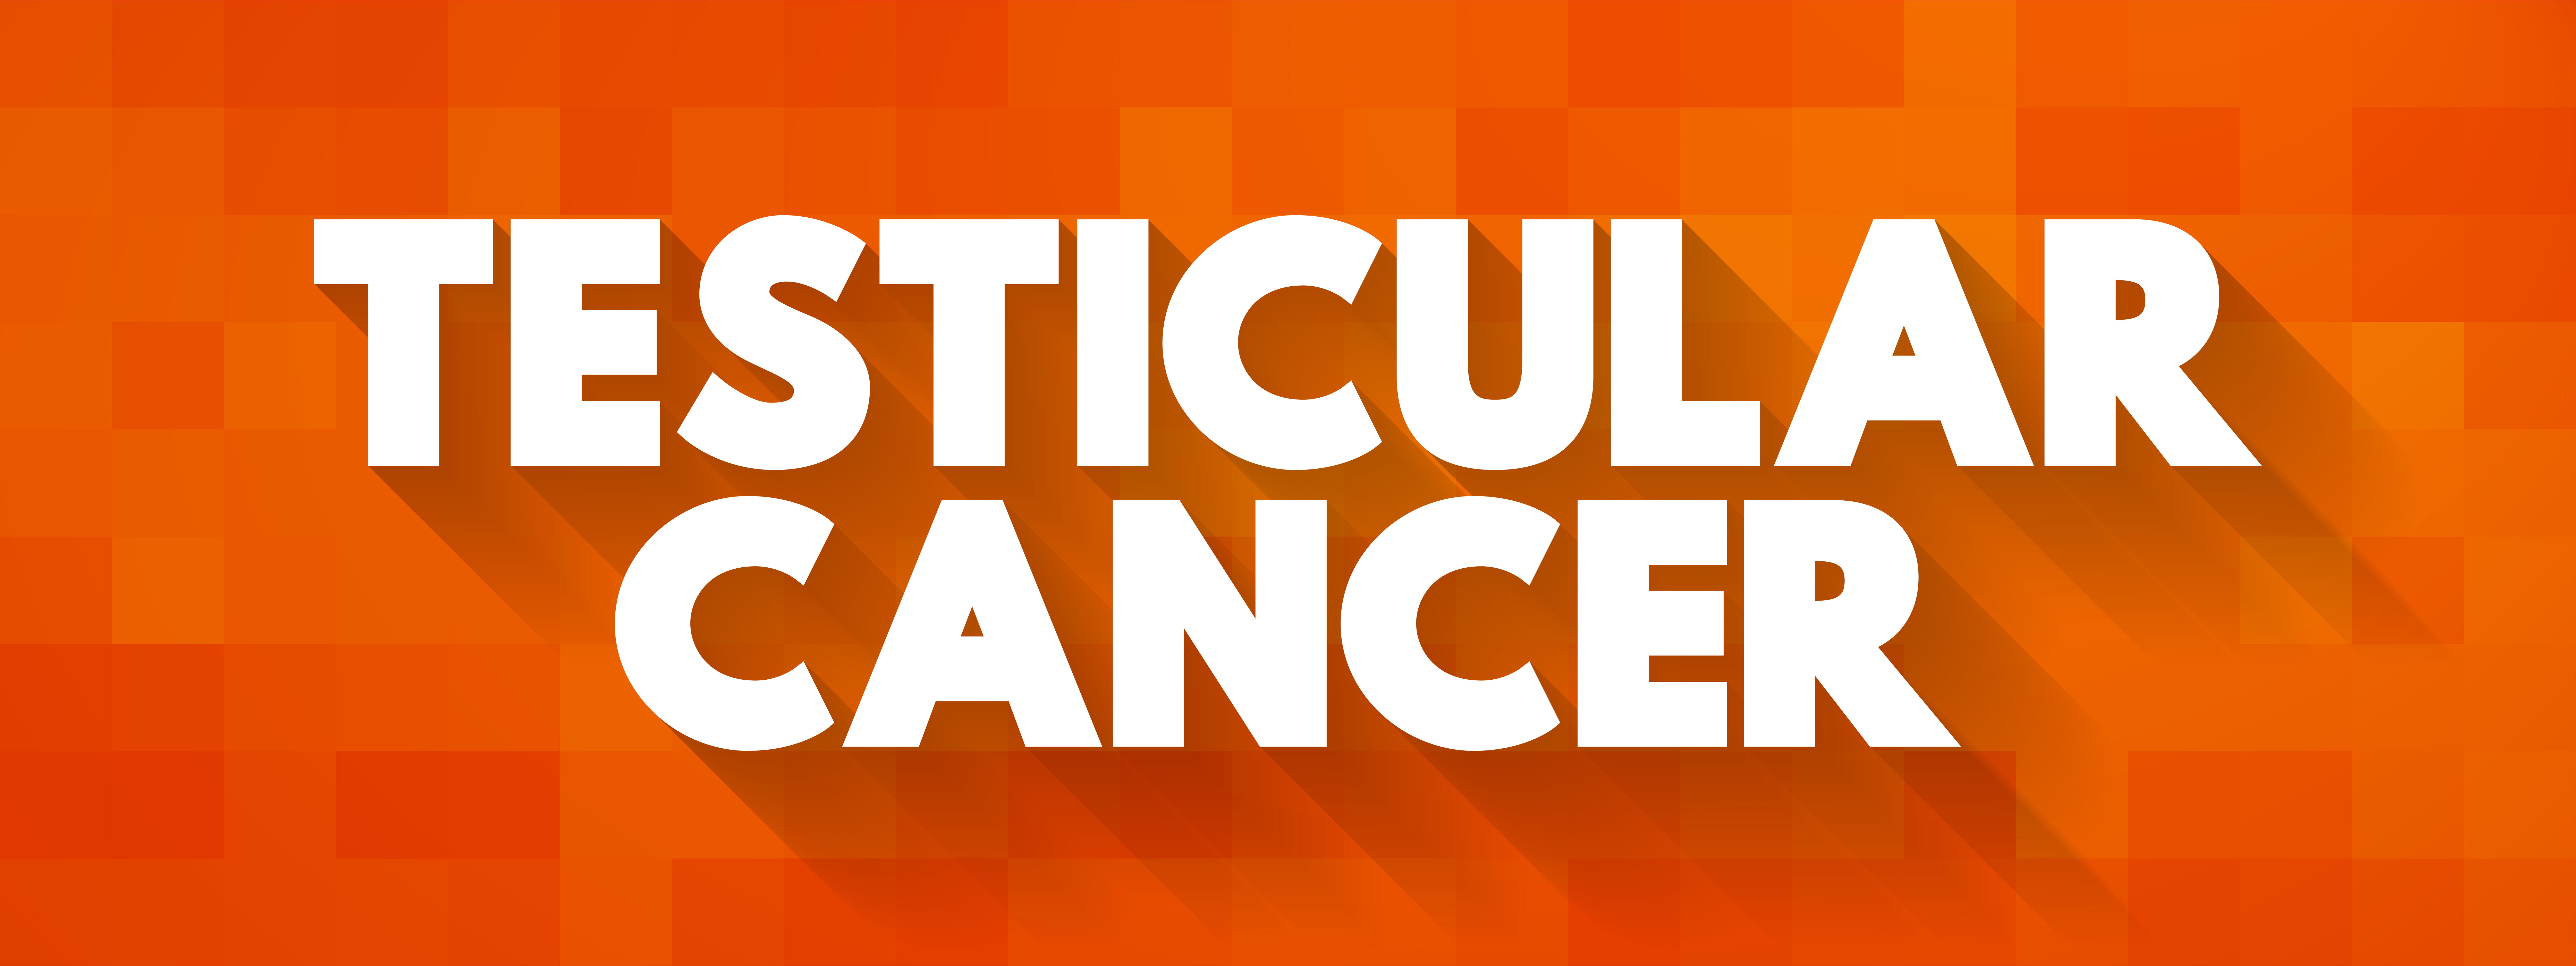 Testicular Cancer, the words on an orange background